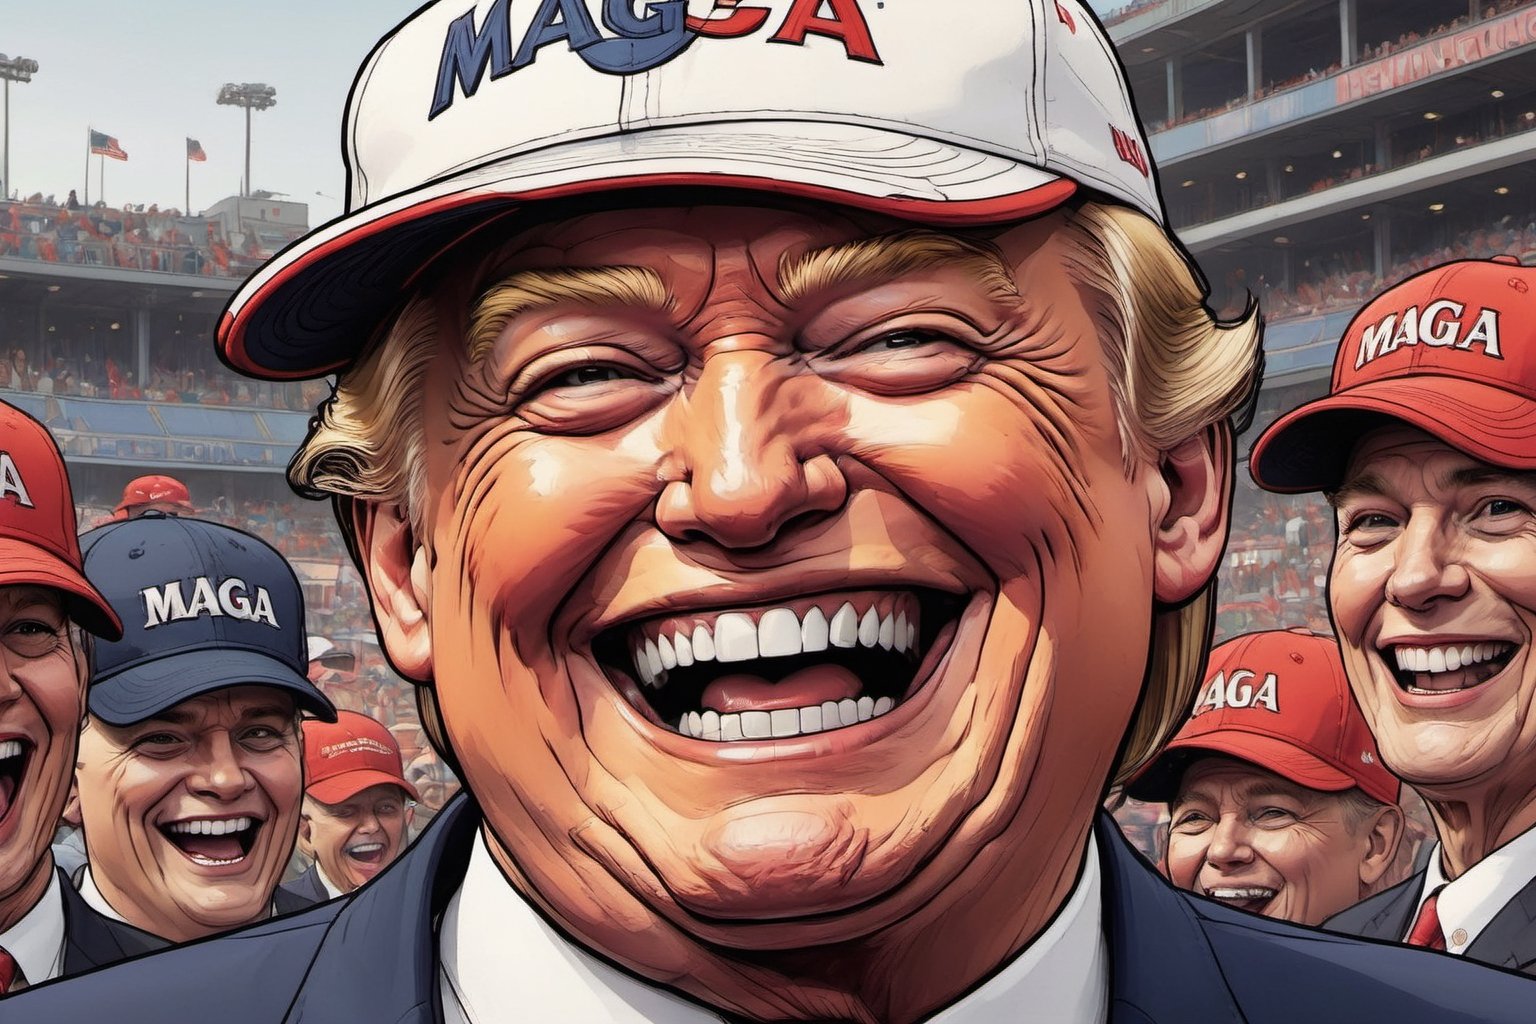 Close up of Donald Trump laughing with his mouth open, wearing MAGA baseball cap